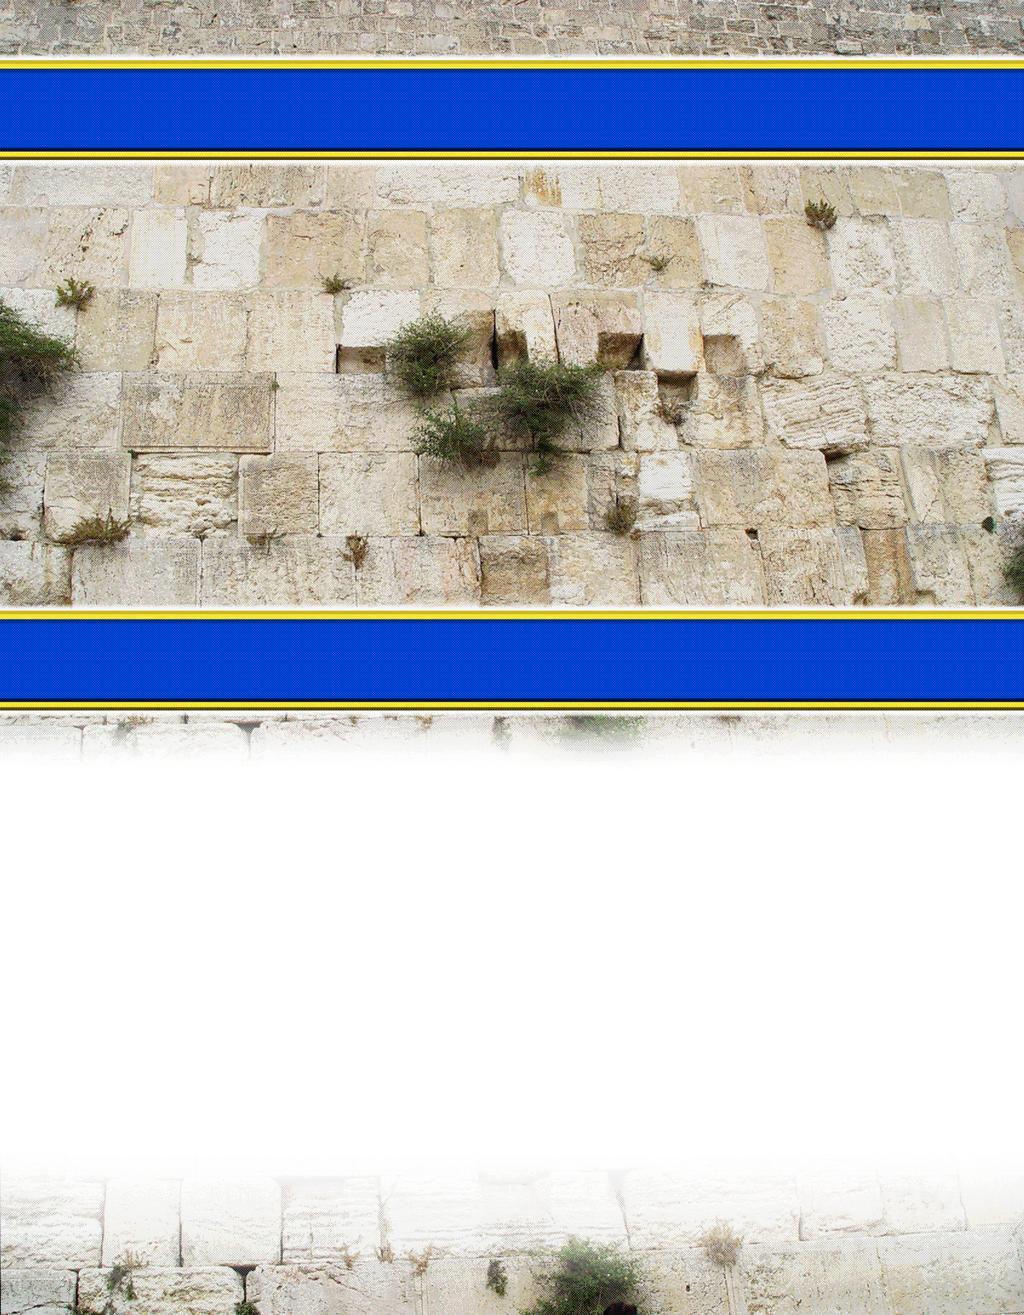 Lion of Judah Ministries Yom Kippur Israel Tour October 2-12, 2011 $3299.00 from Richmond VA Shalom Friends, I want to invite you to join us on our annual tour of the Holy Land.